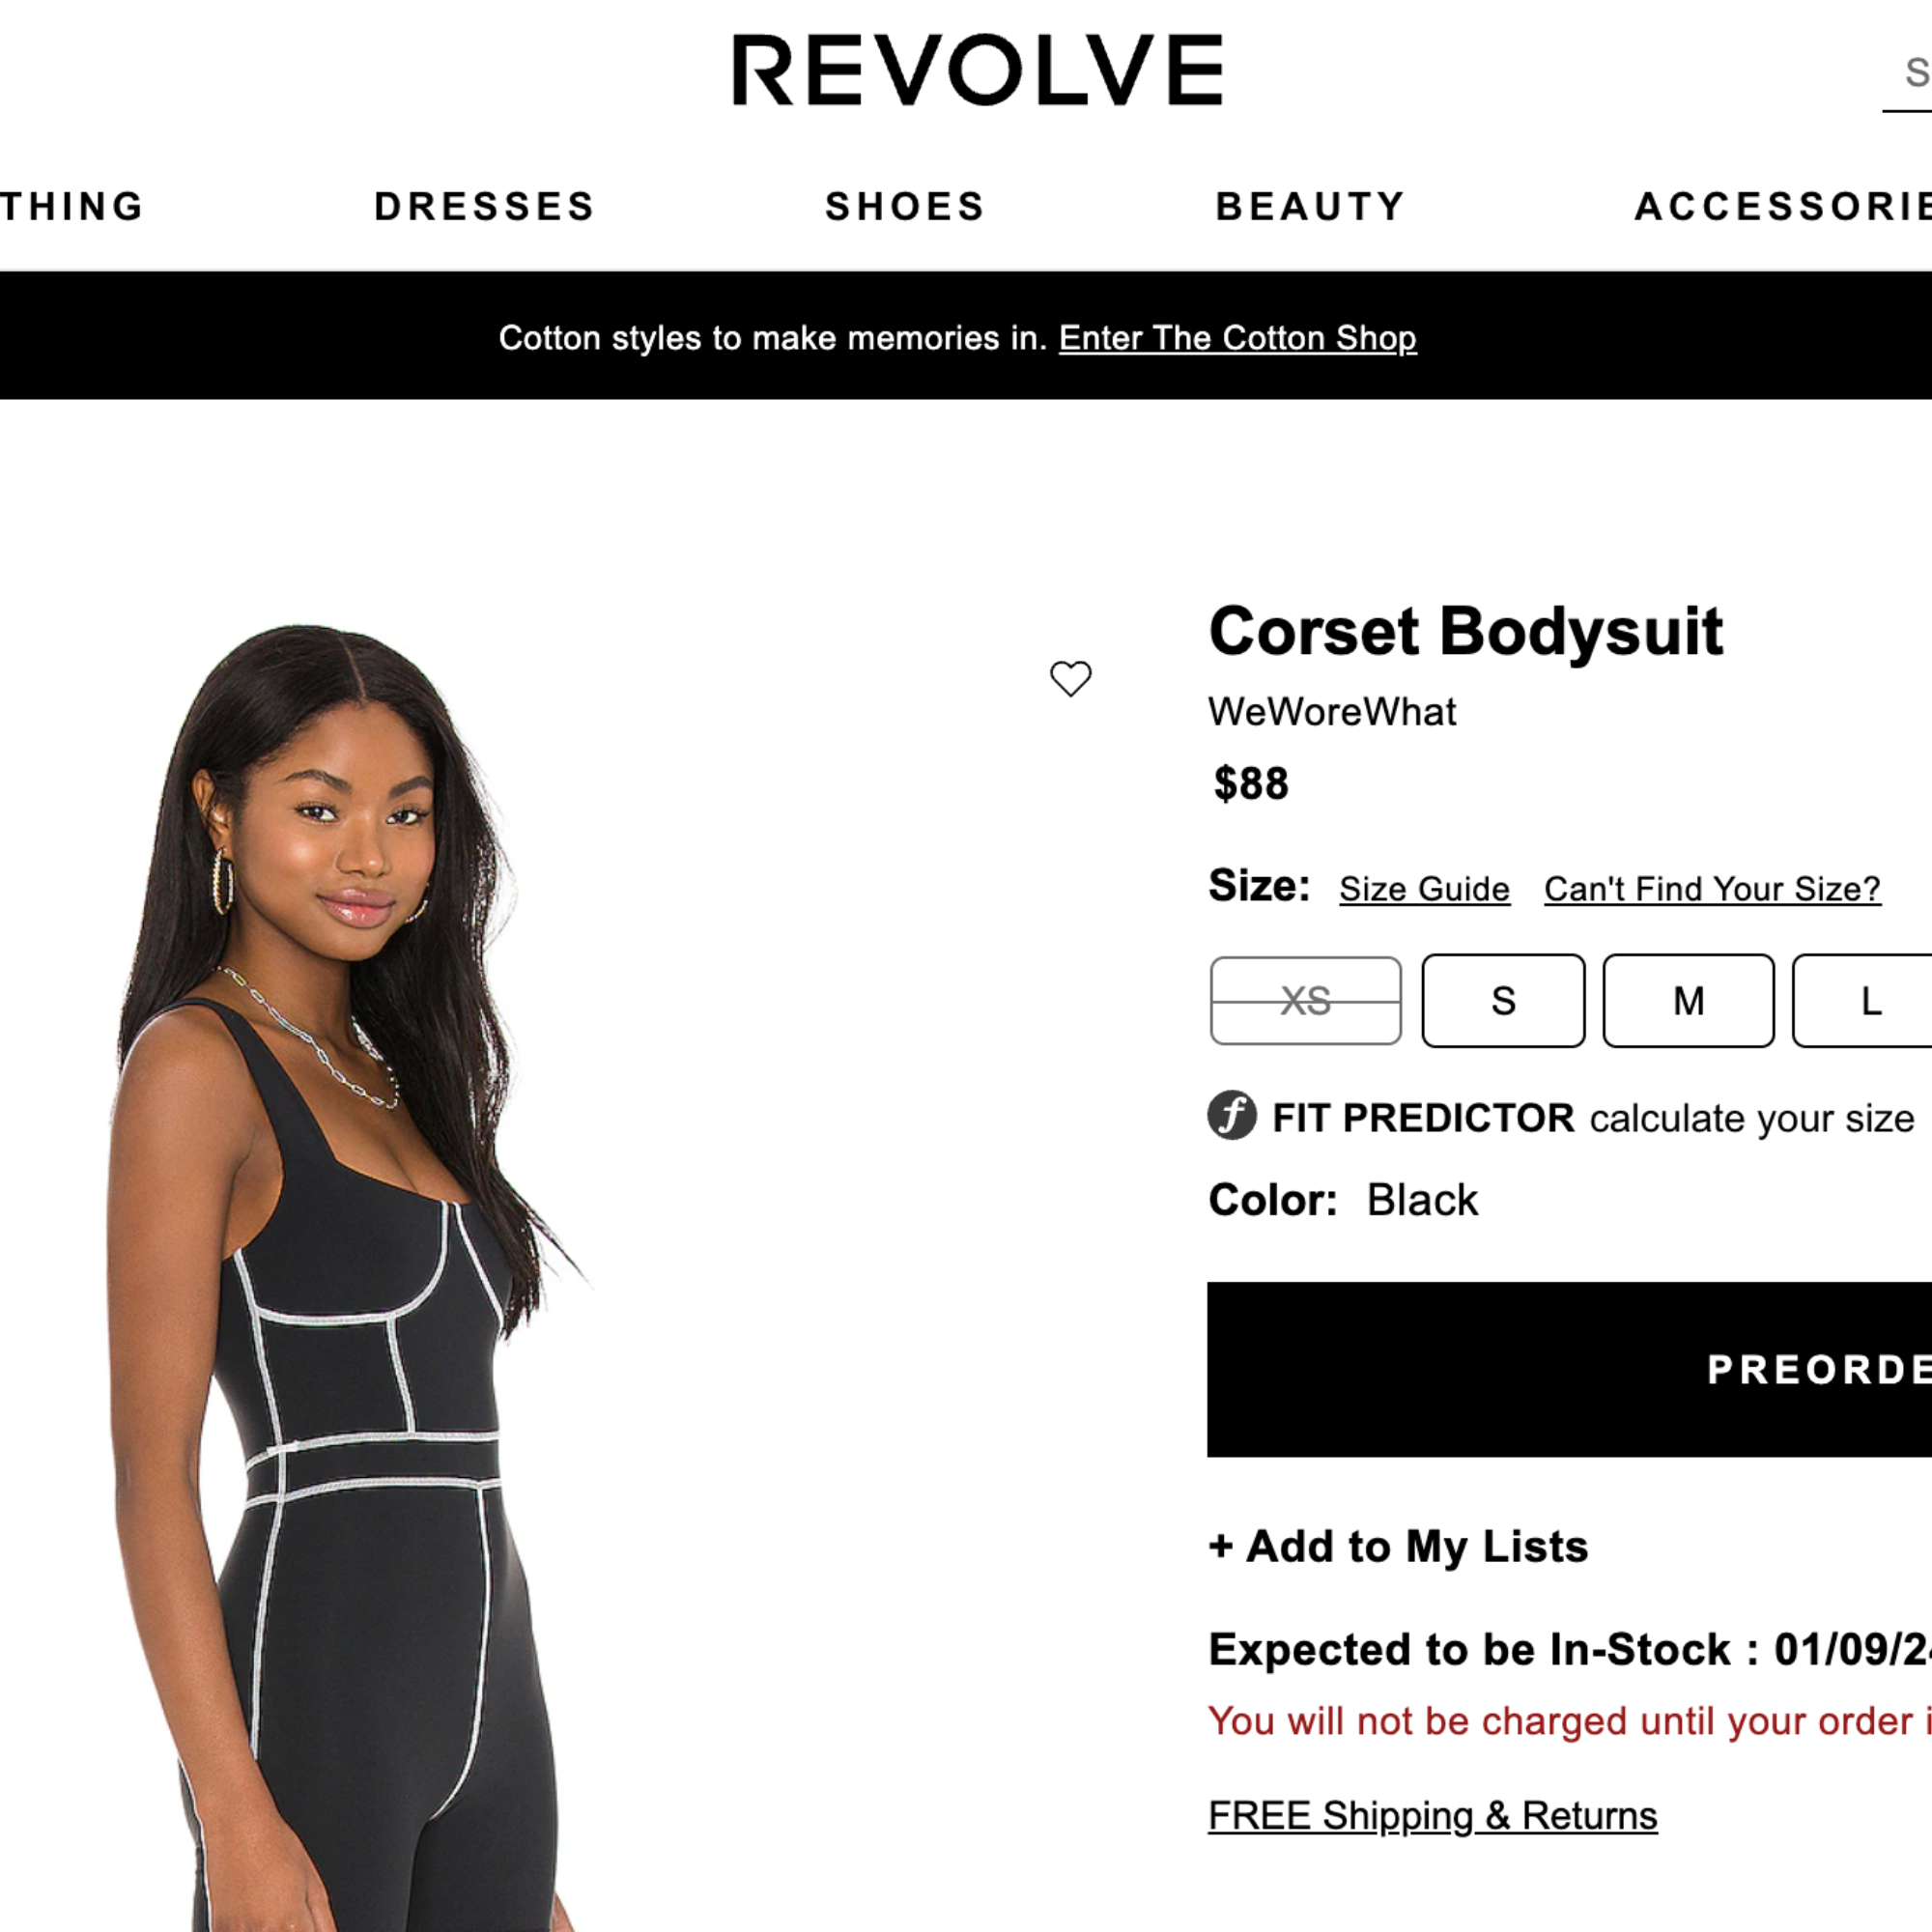 We Wore What Revolve Athleisure Women's New Wholesale